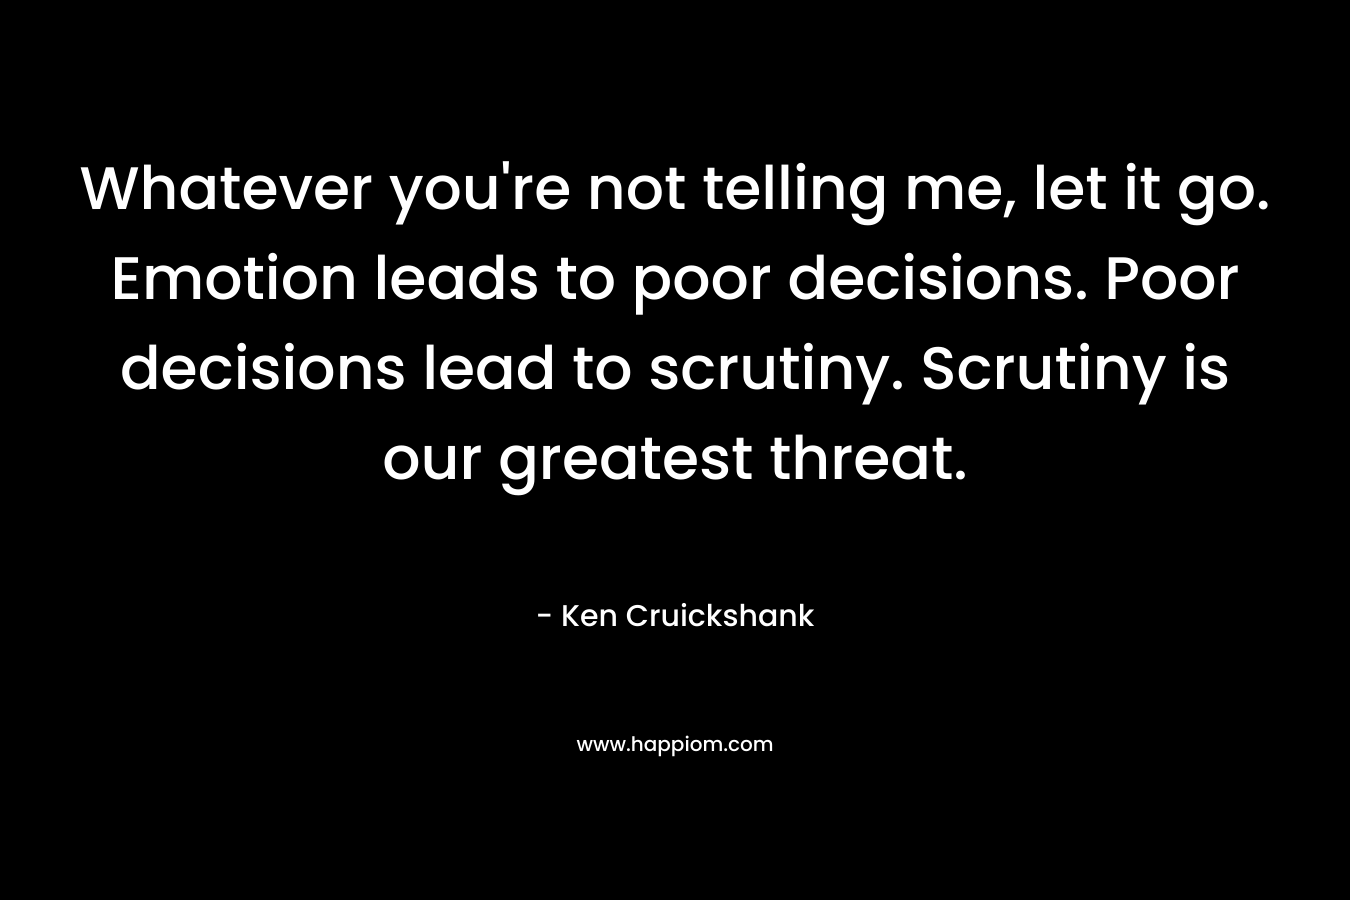 Whatever you're not telling me, let it go. Emotion leads to poor decisions. Poor decisions lead to scrutiny. Scrutiny is our greatest threat.